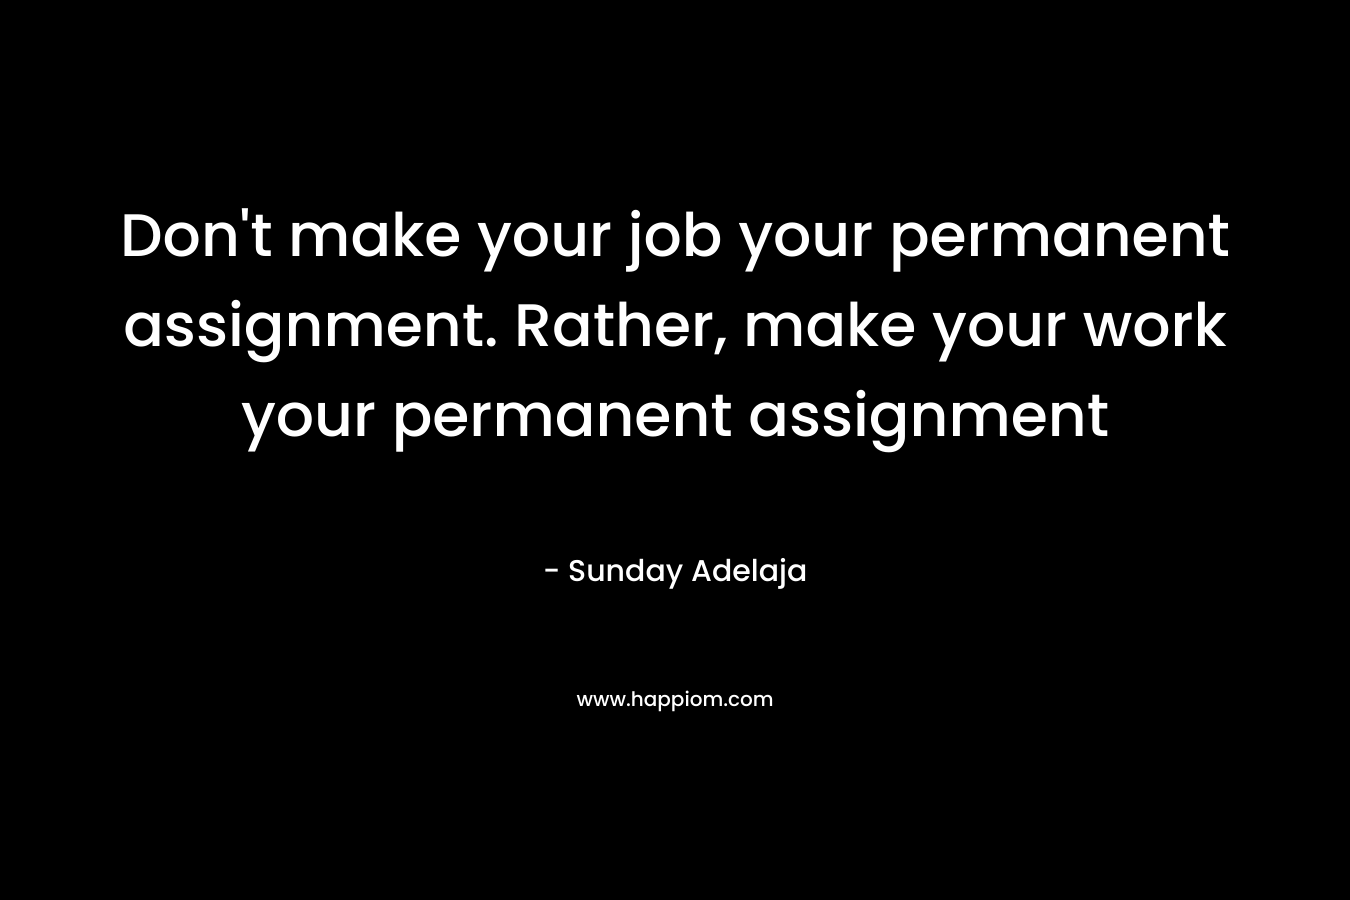 Don't make your job your permanent assignment. Rather, make your work your permanent assignment